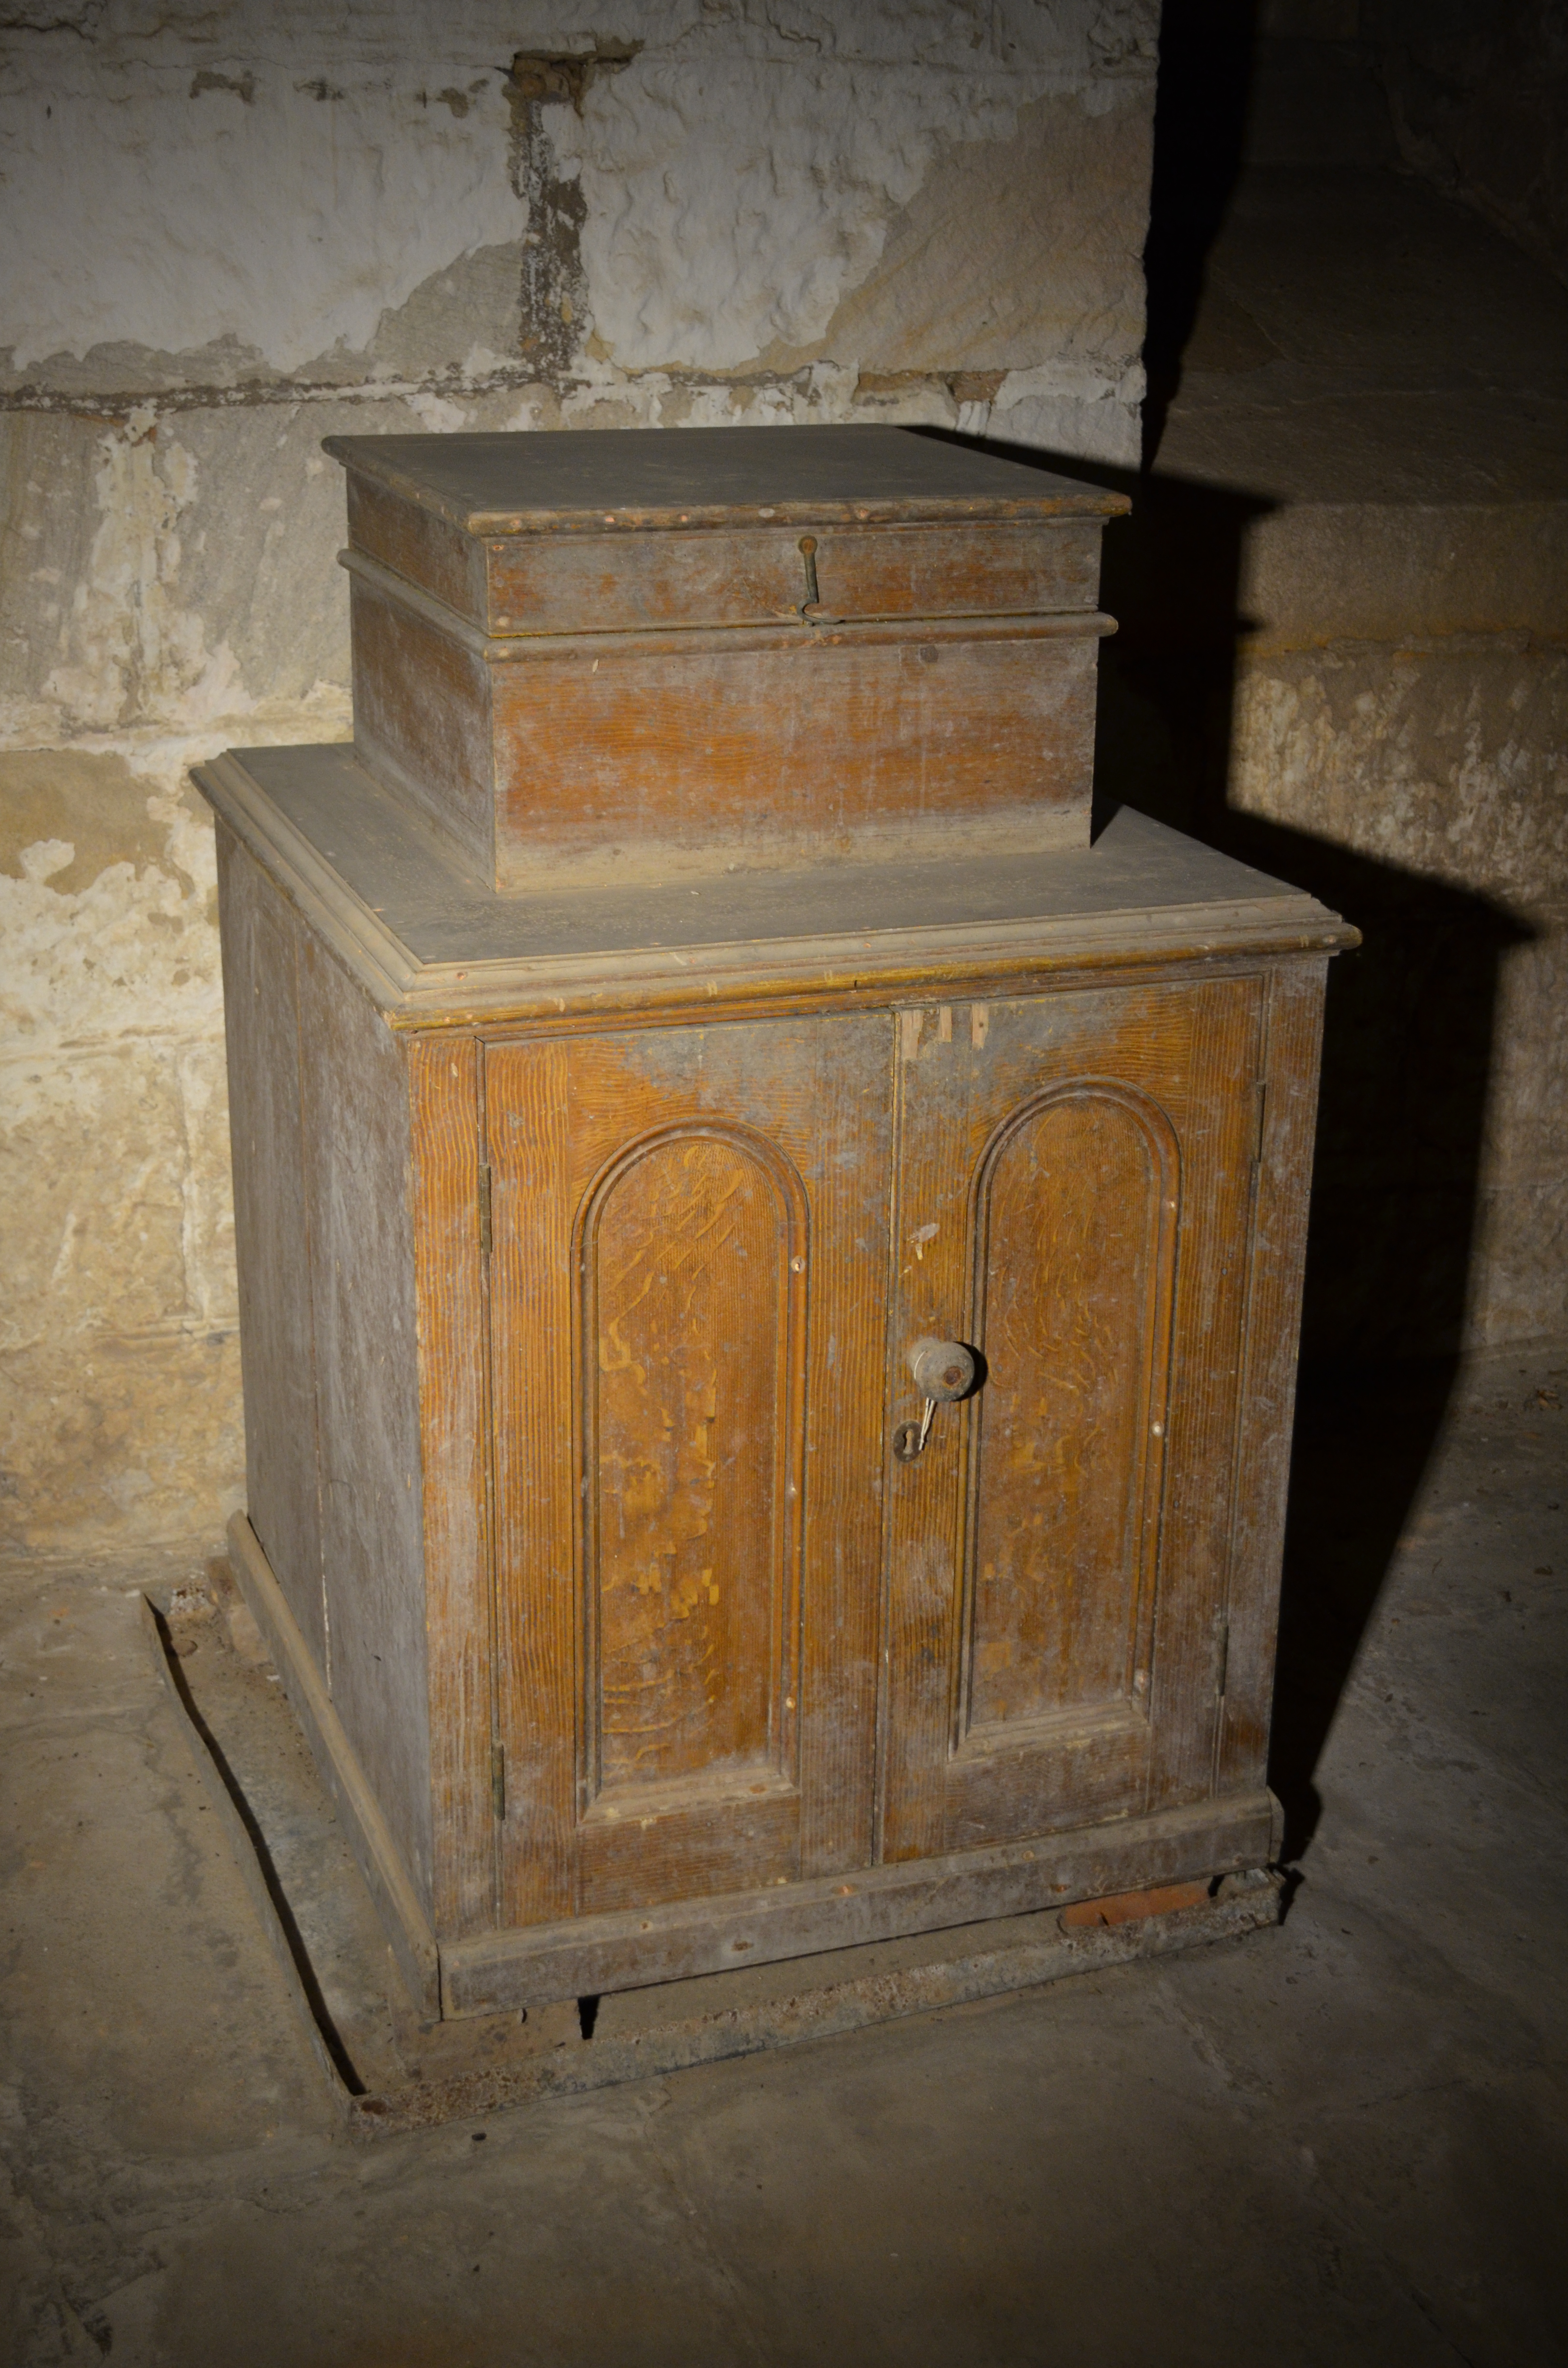 Ice chest in the cellar at Rouse Hill House with its compartment doors closed.